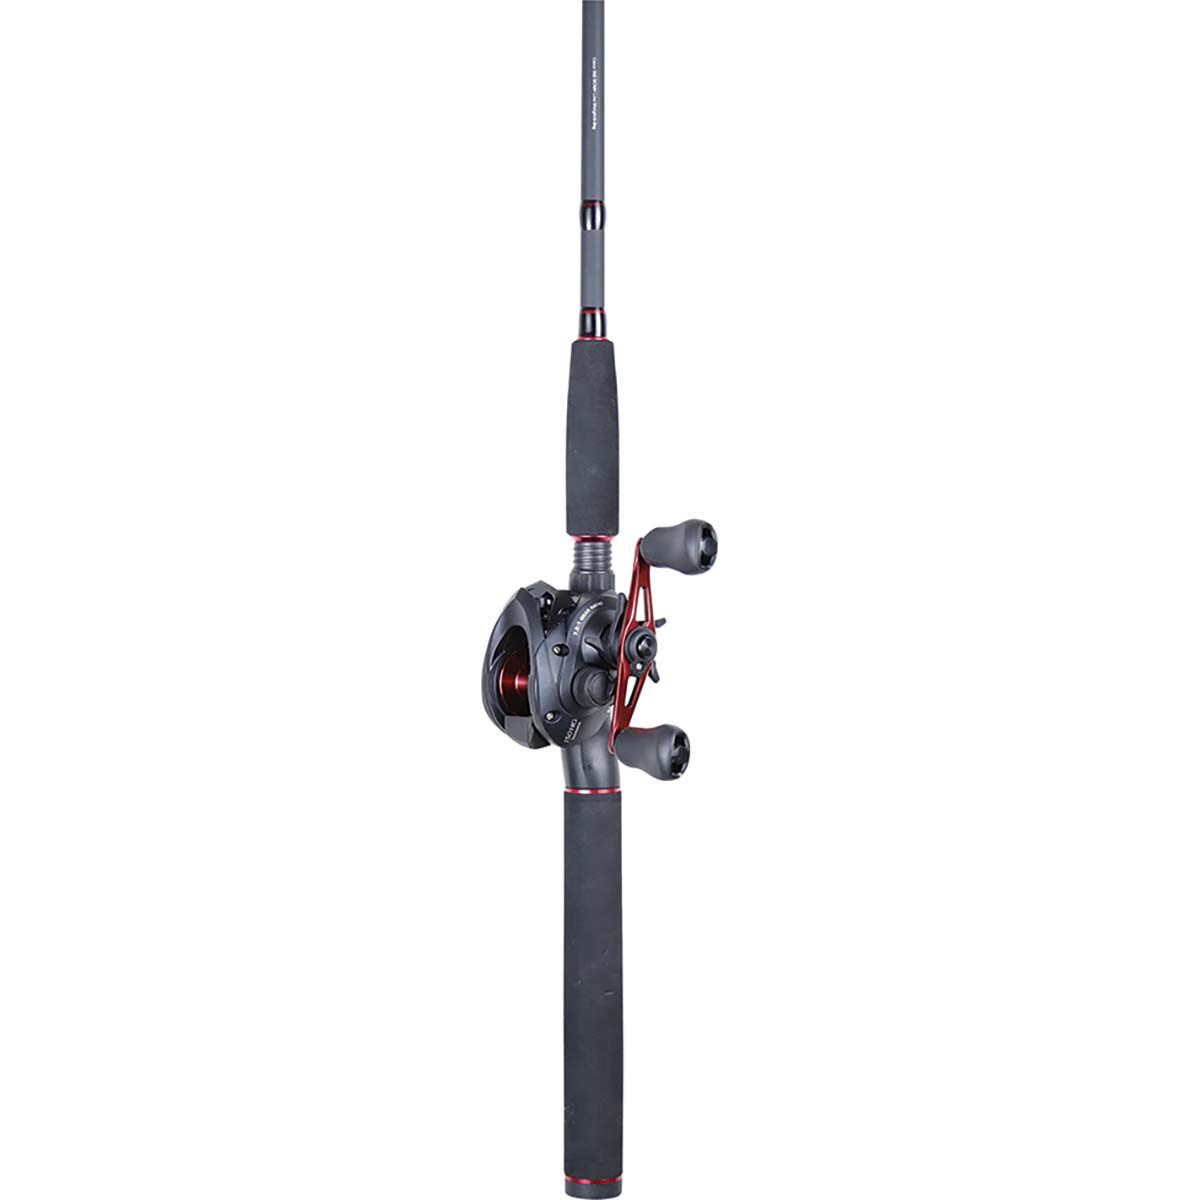 shimano baitcasting rod and reel combo, Hot Sale Exclusive Offers,Up To 69%  Off